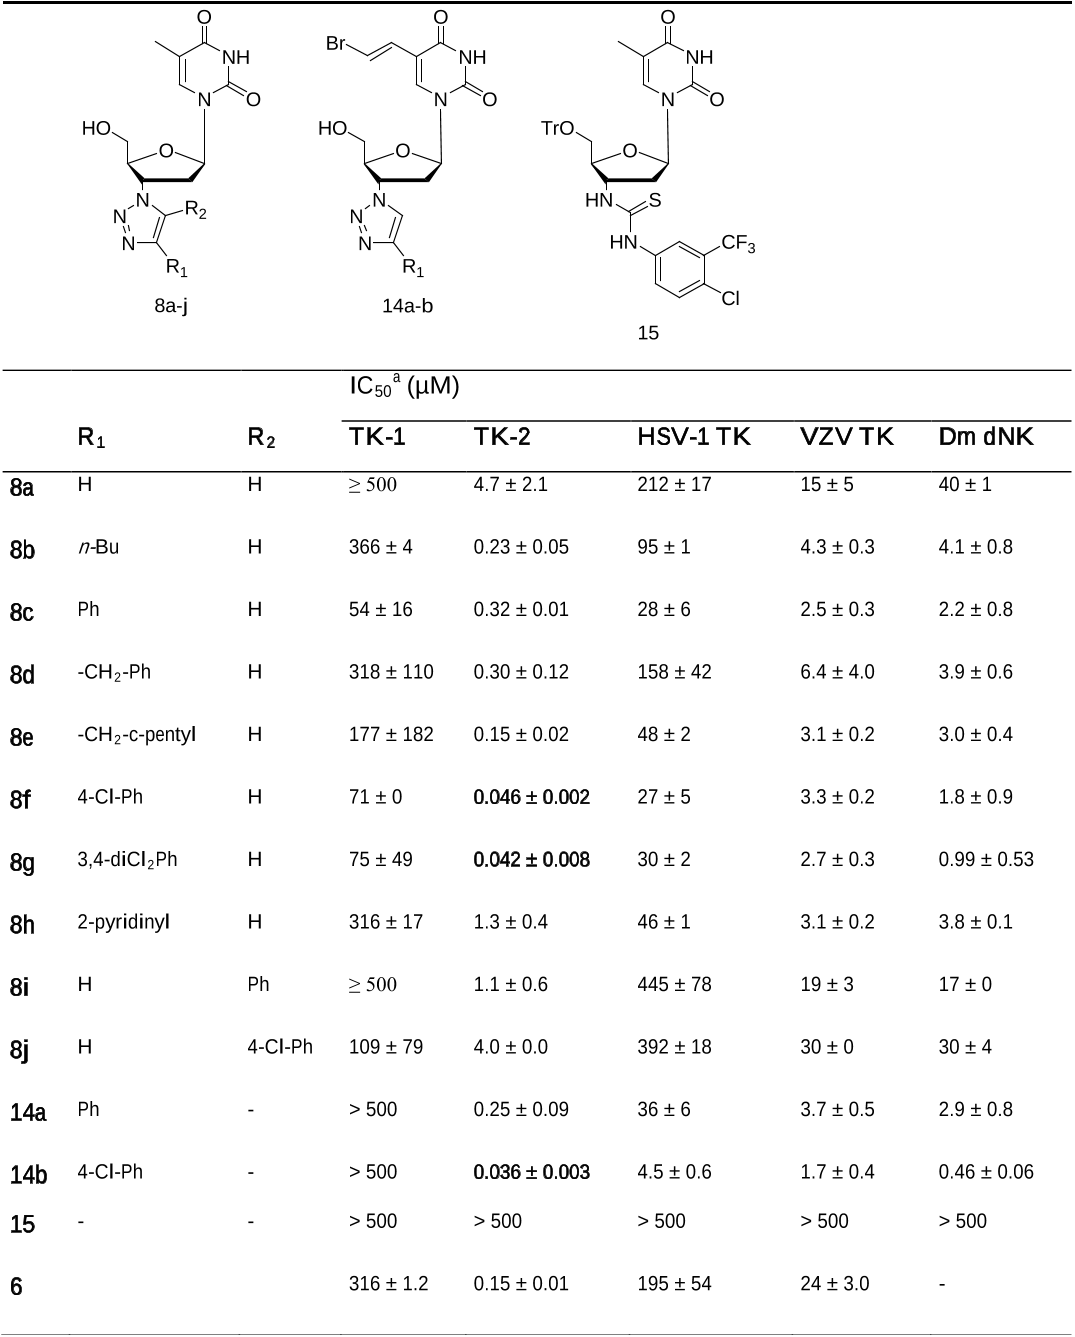 Table 3. Inhibitory activity of 3’-triazol-1-yl derivatives of thymidine against nucleoside kinasecatalysed phosphorylation of 1 µM [CH3-3 H]thymidine compared with thiourea 6.